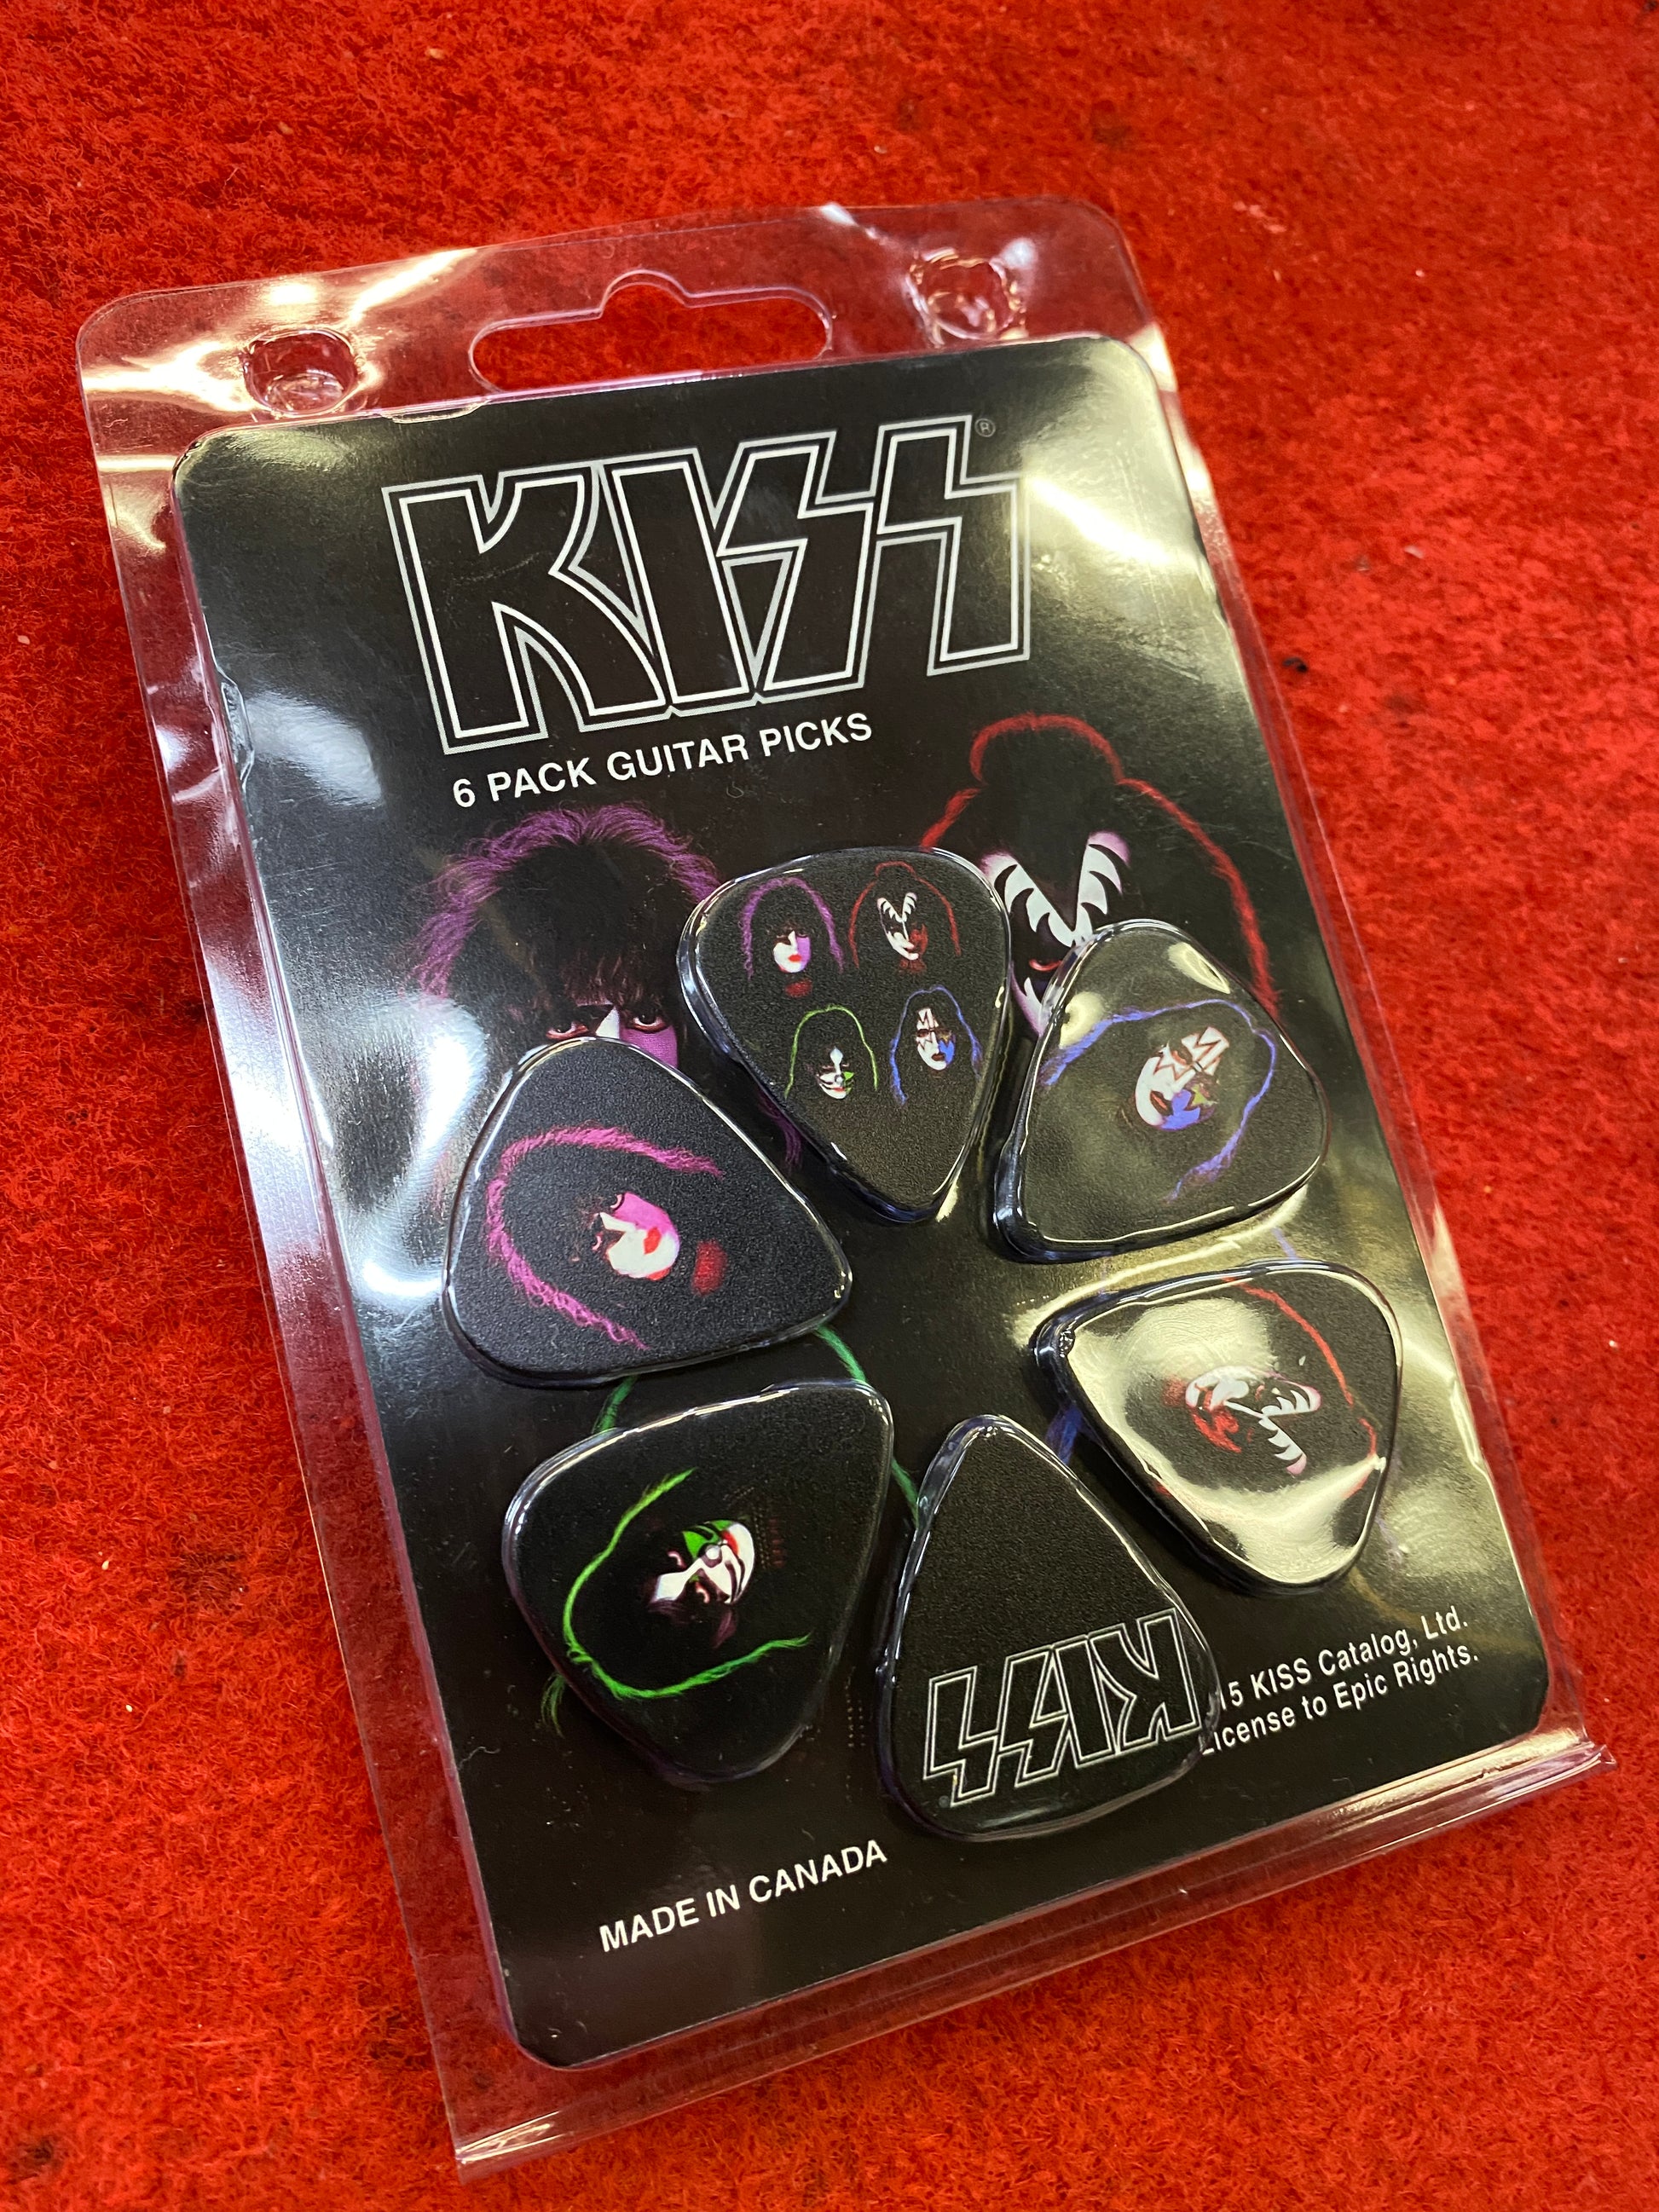 KISS #1 Limited Edition Picks - 6 Pack - 0.71mm